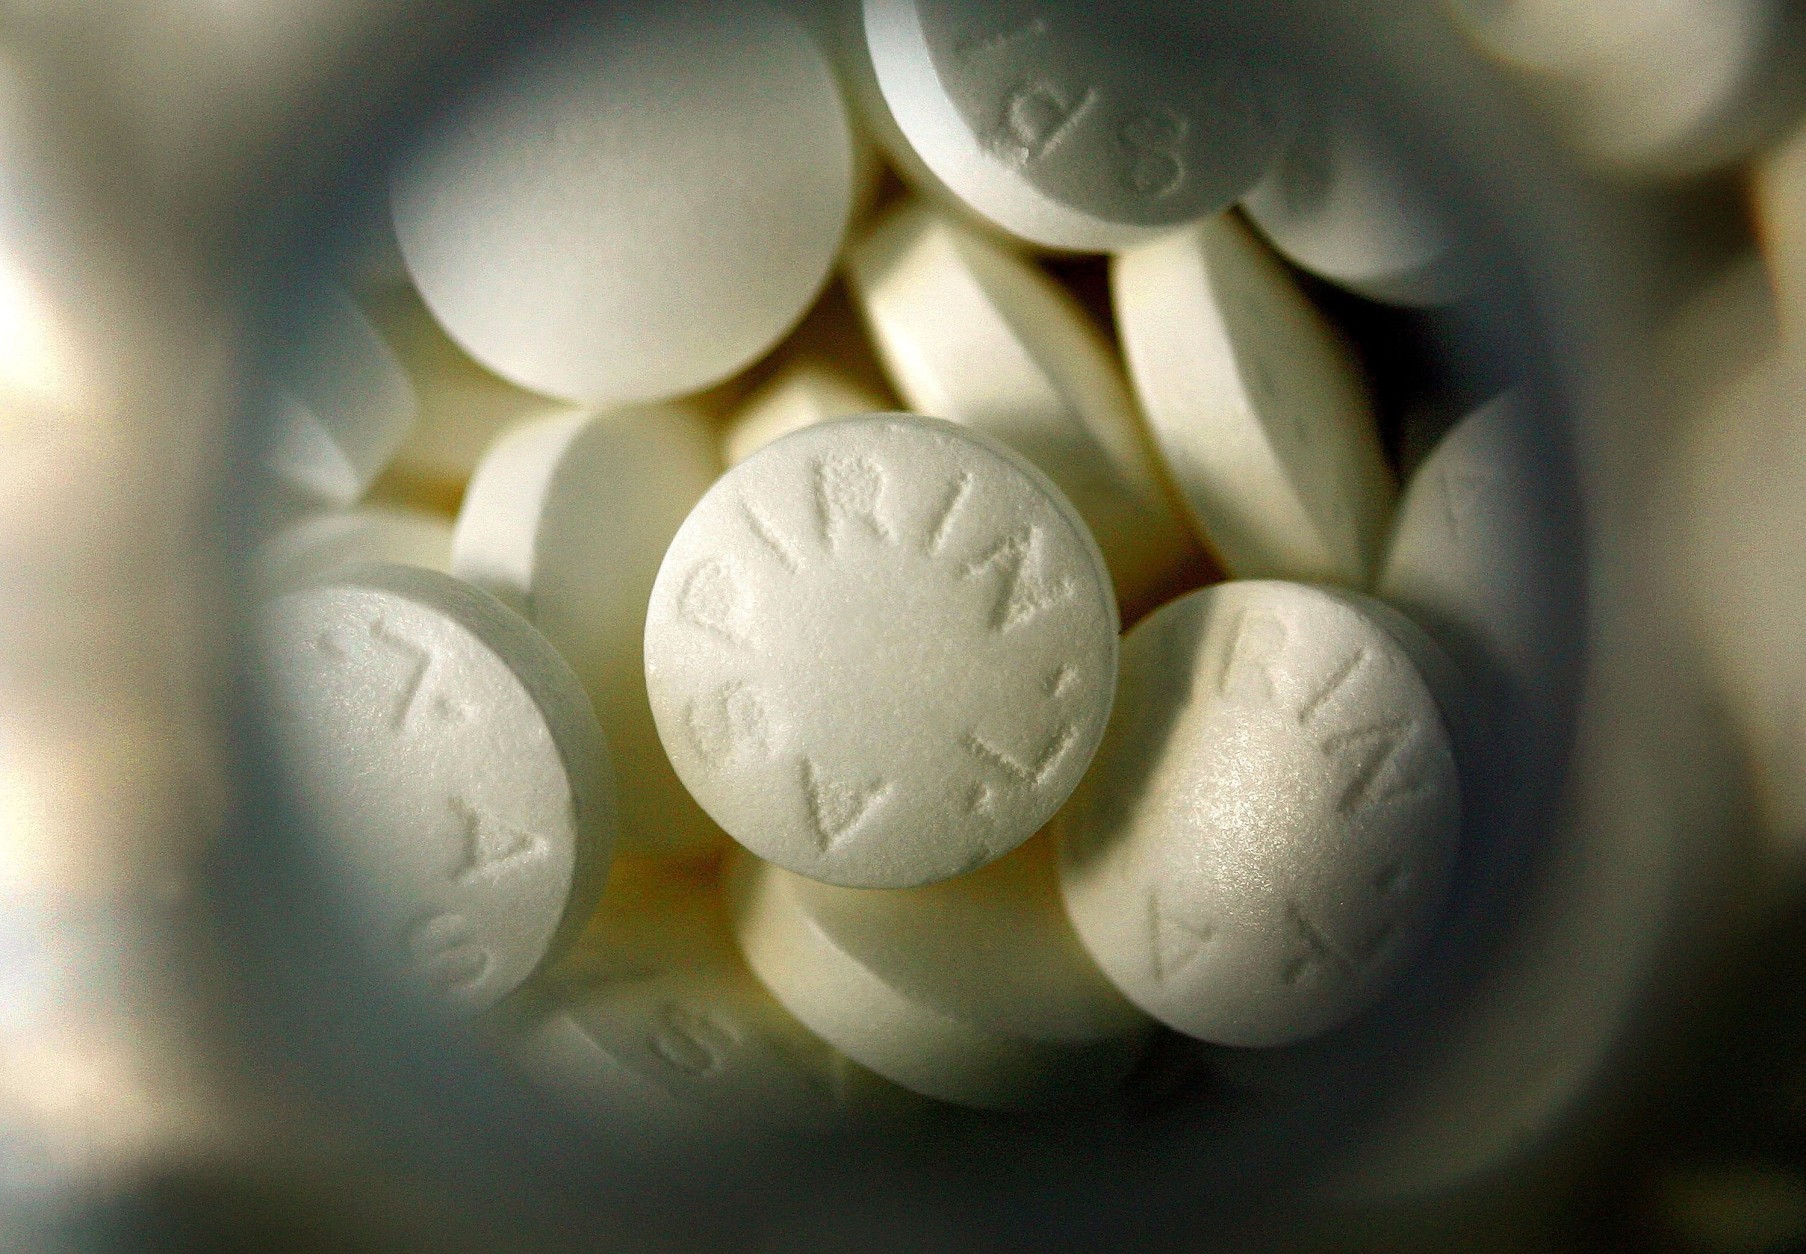 Taking aspirin does come with risks. (Photo Illustration by Tim Boyle/Getty Images)